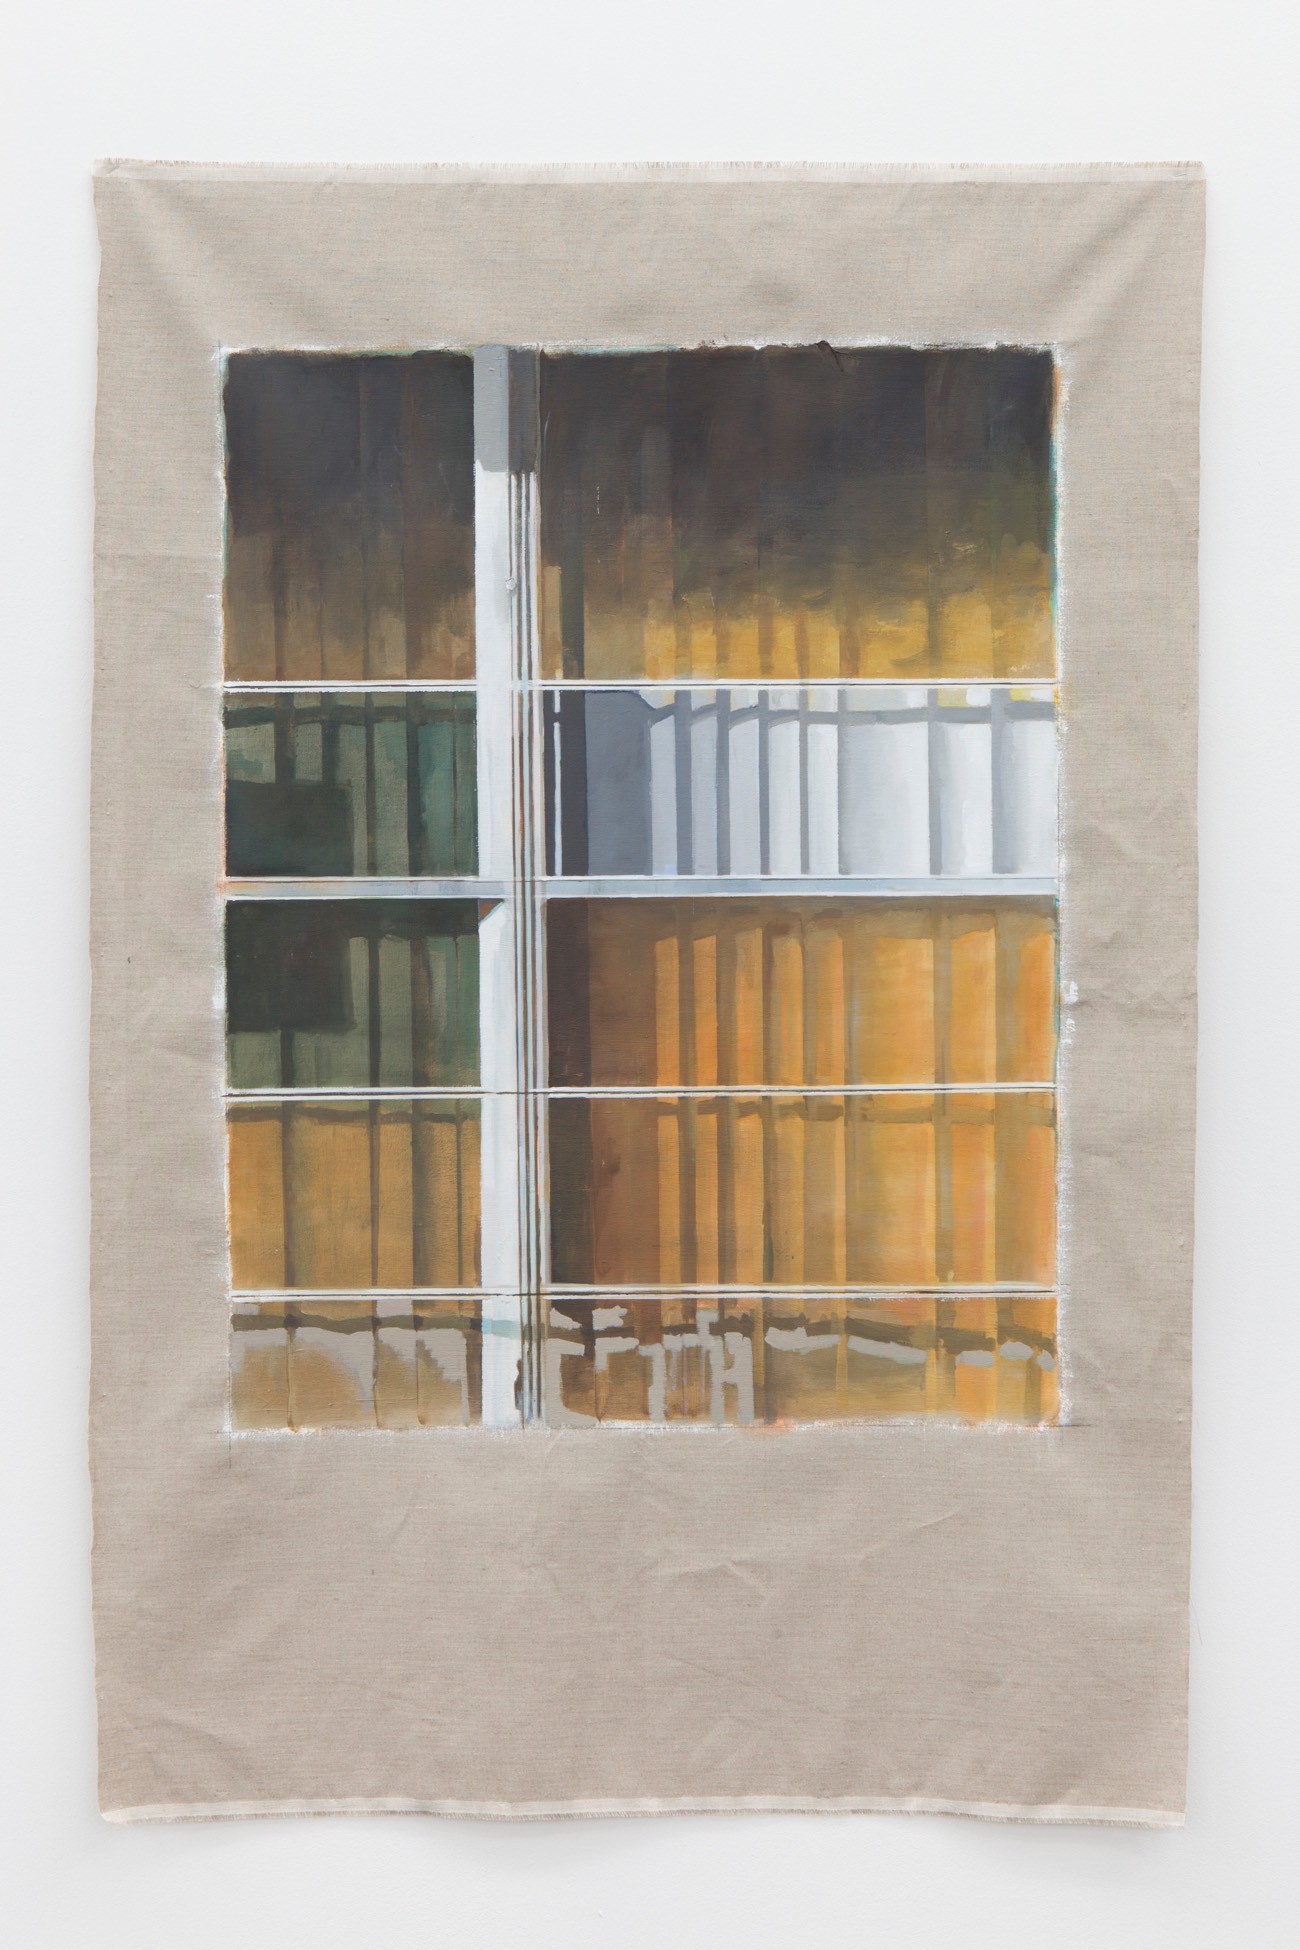 Blinds and Bright, 2012 - 2013